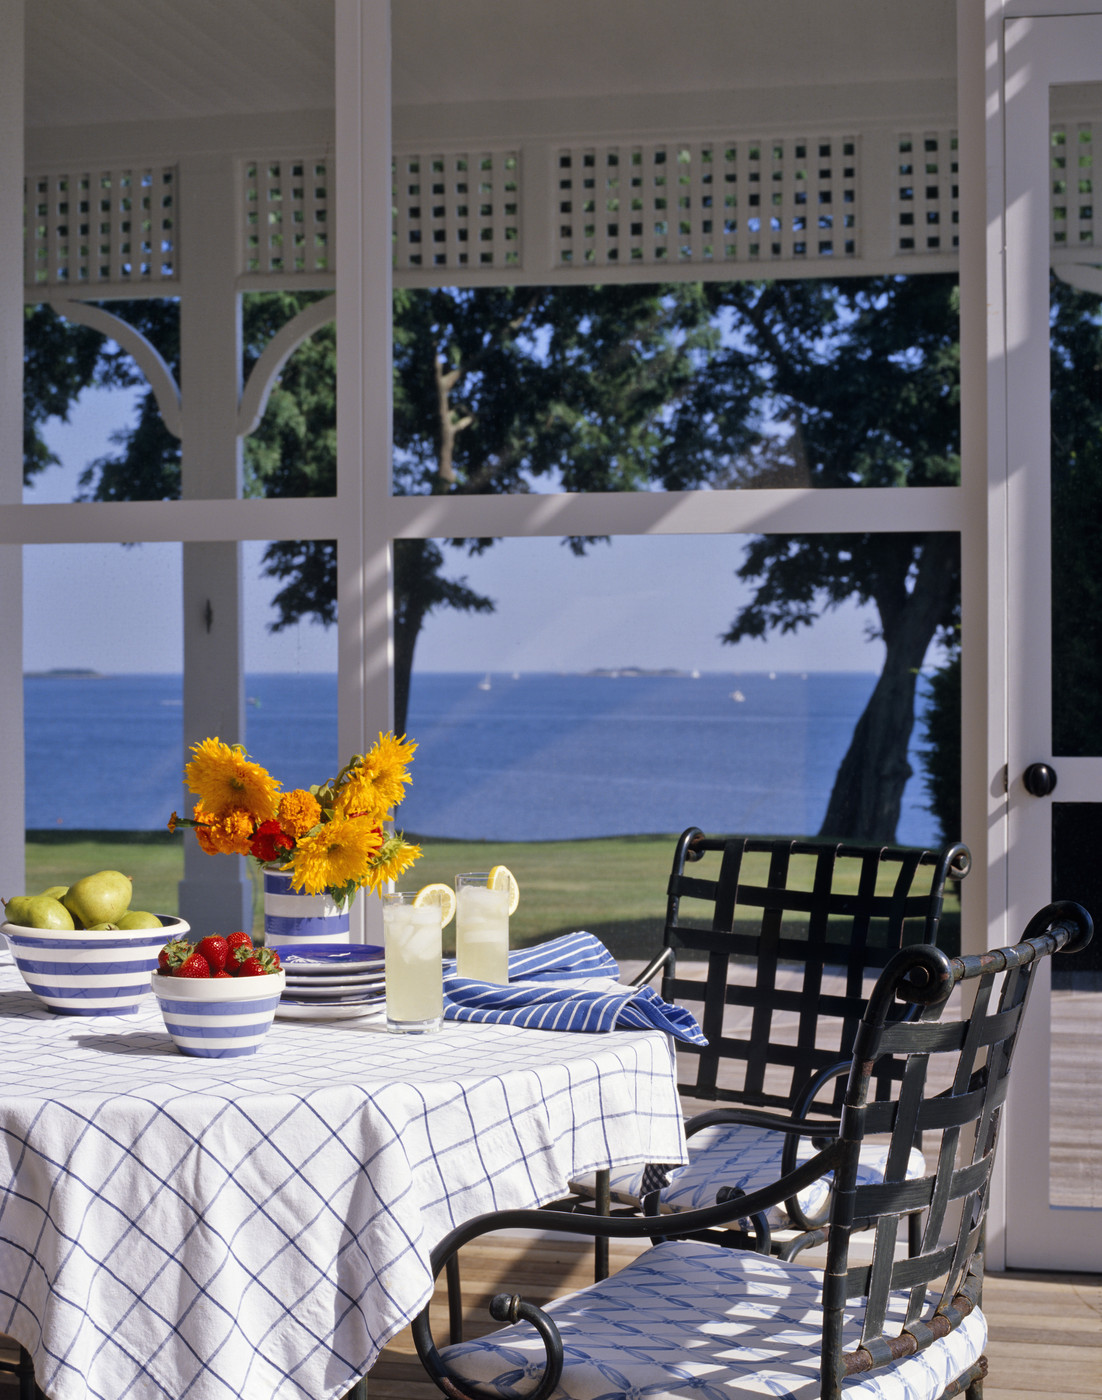 Classic grid tablecloth on a sunny porch